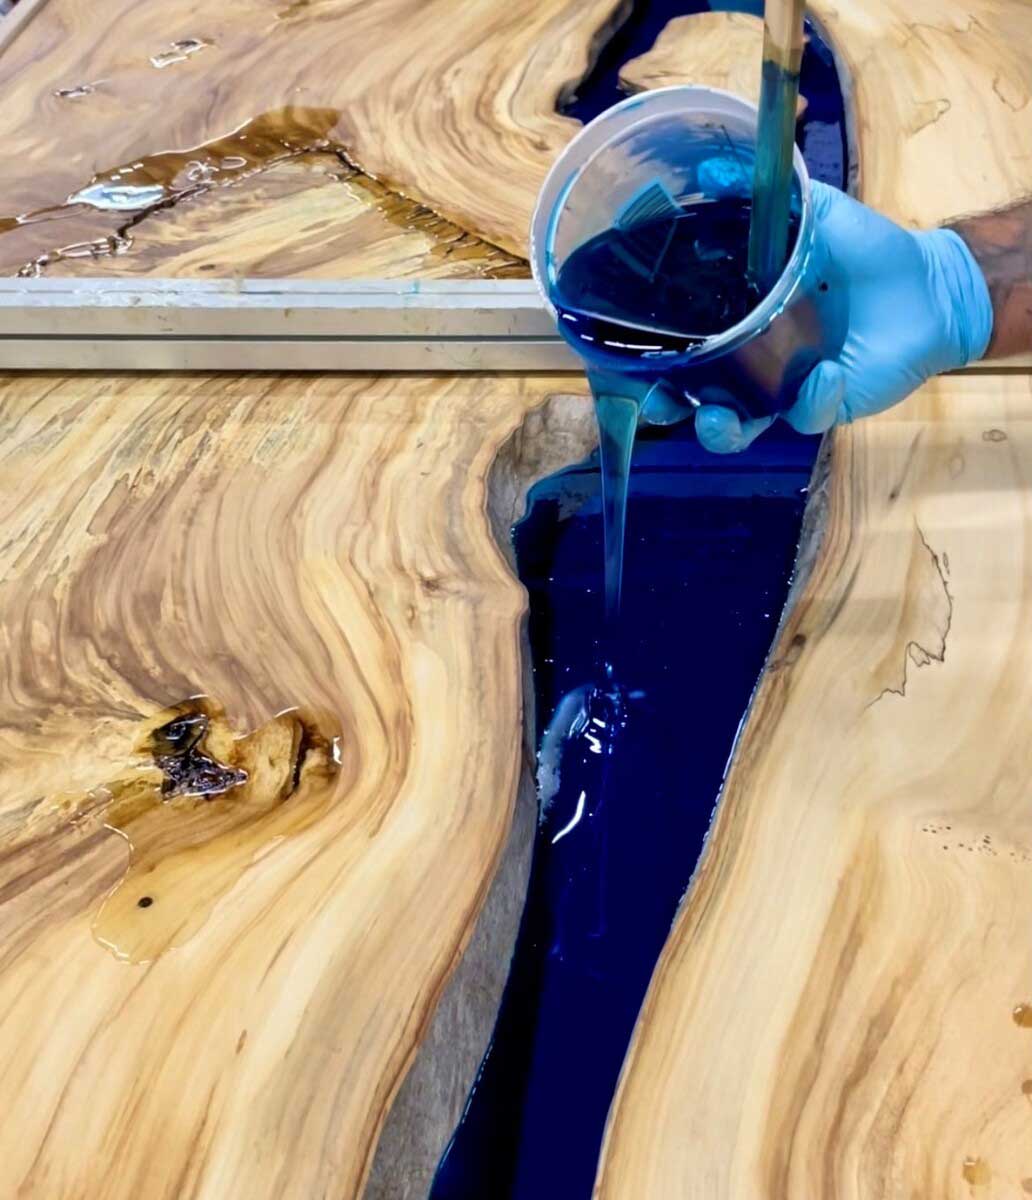 Hand Pouring Epoxy Demo Sat Feb 12, 2022 in The Lumber Store